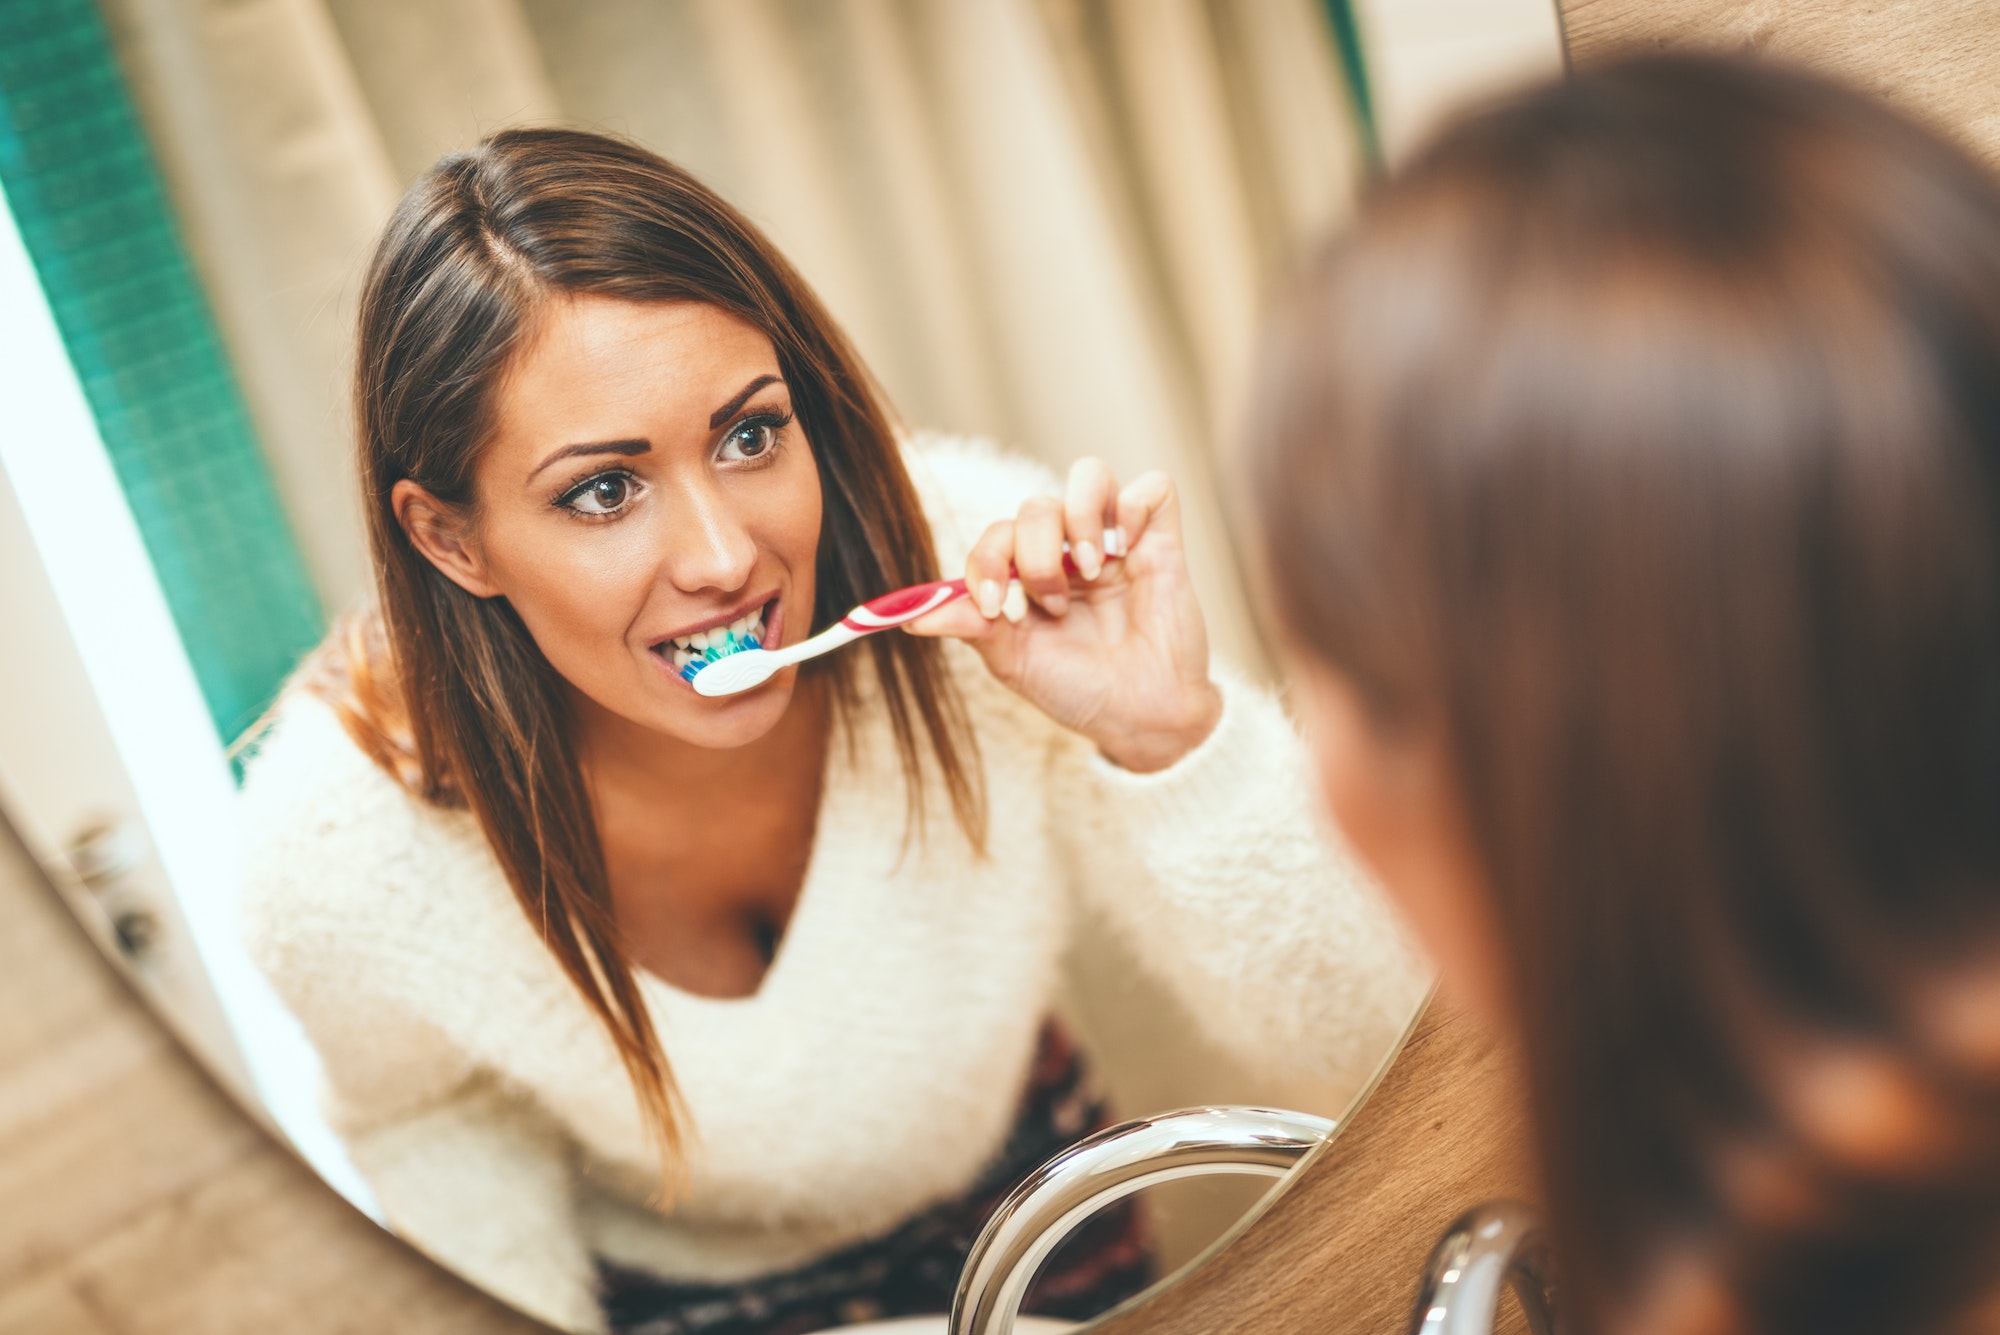 Oral Health Reflects Your Overall Health